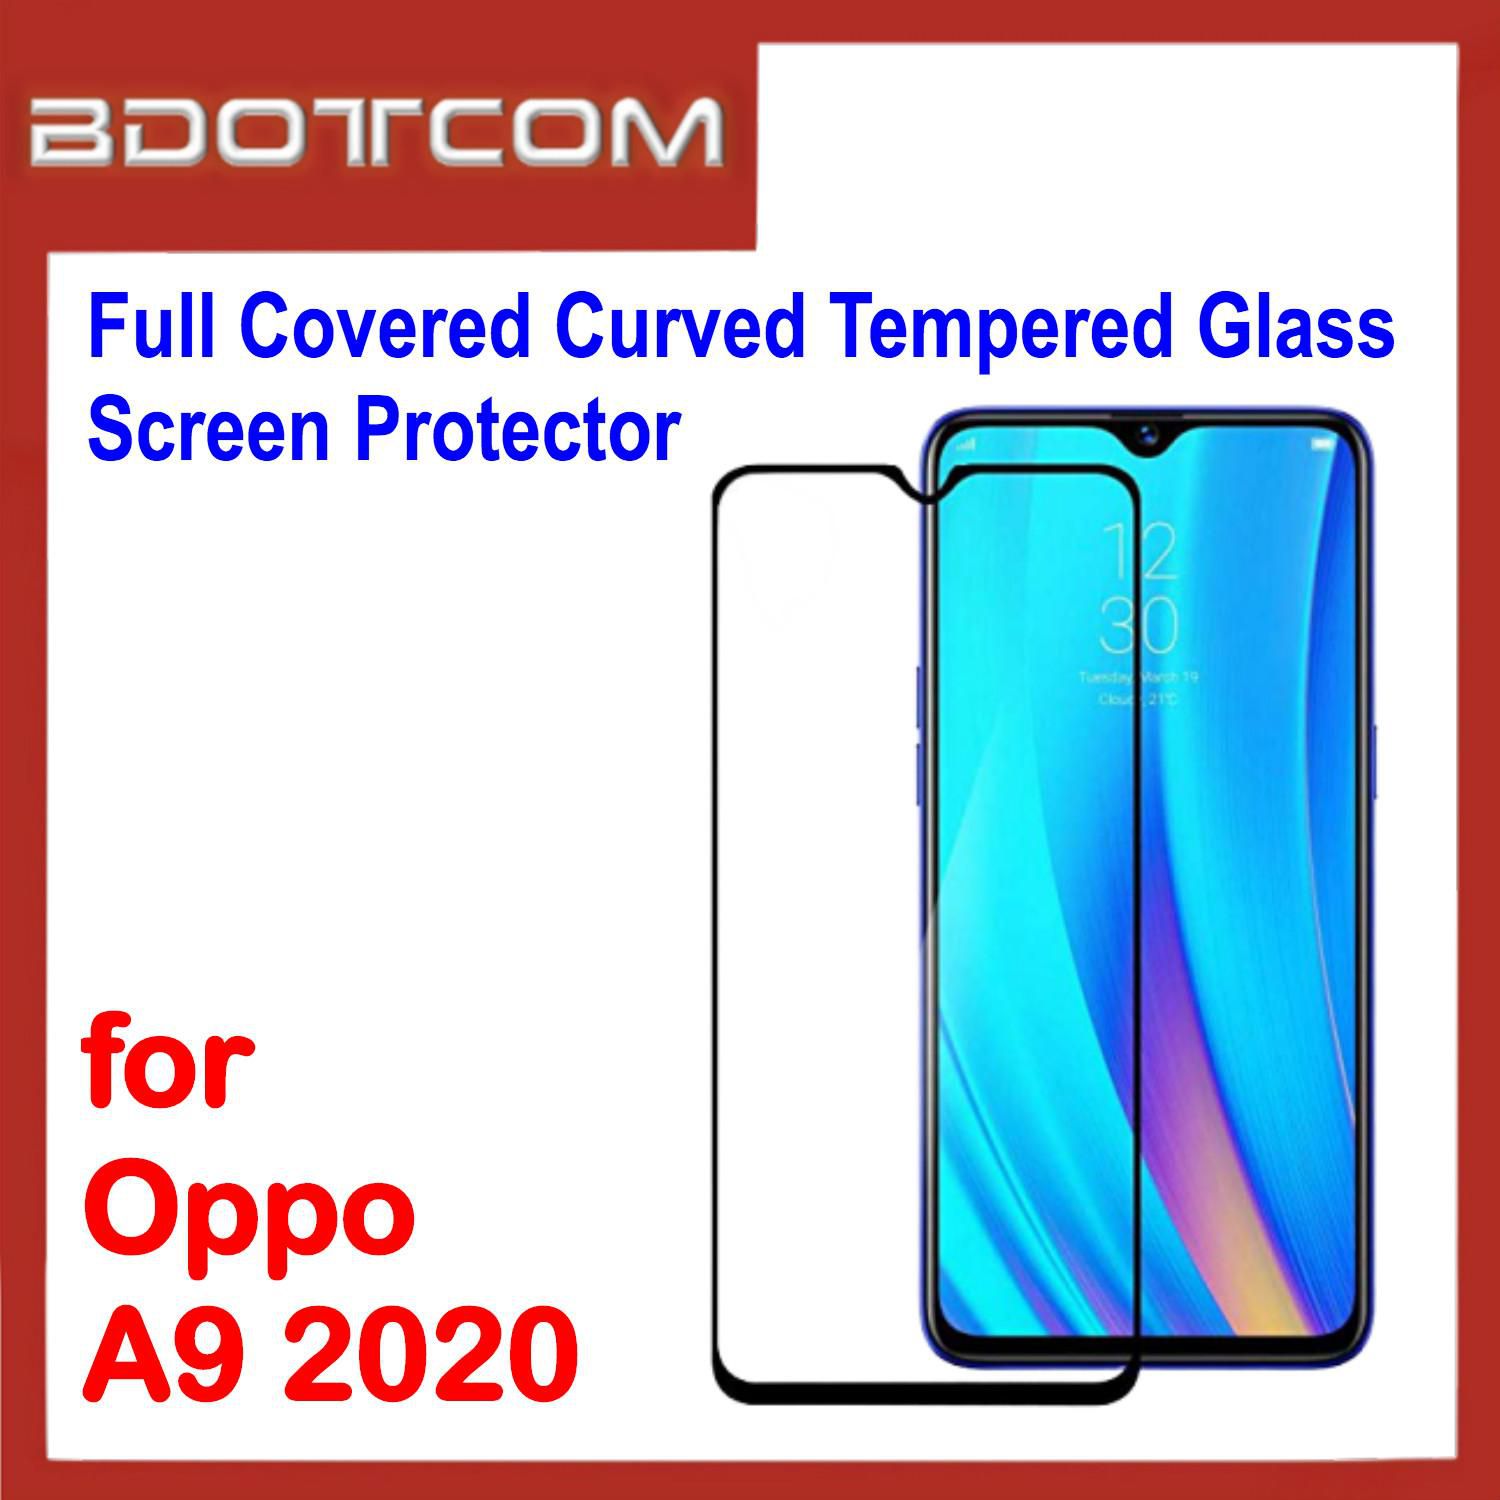 Bdotcom Full Covered Curved Tempered Glass Screen Protector for Oppo A9 2020 (Black)